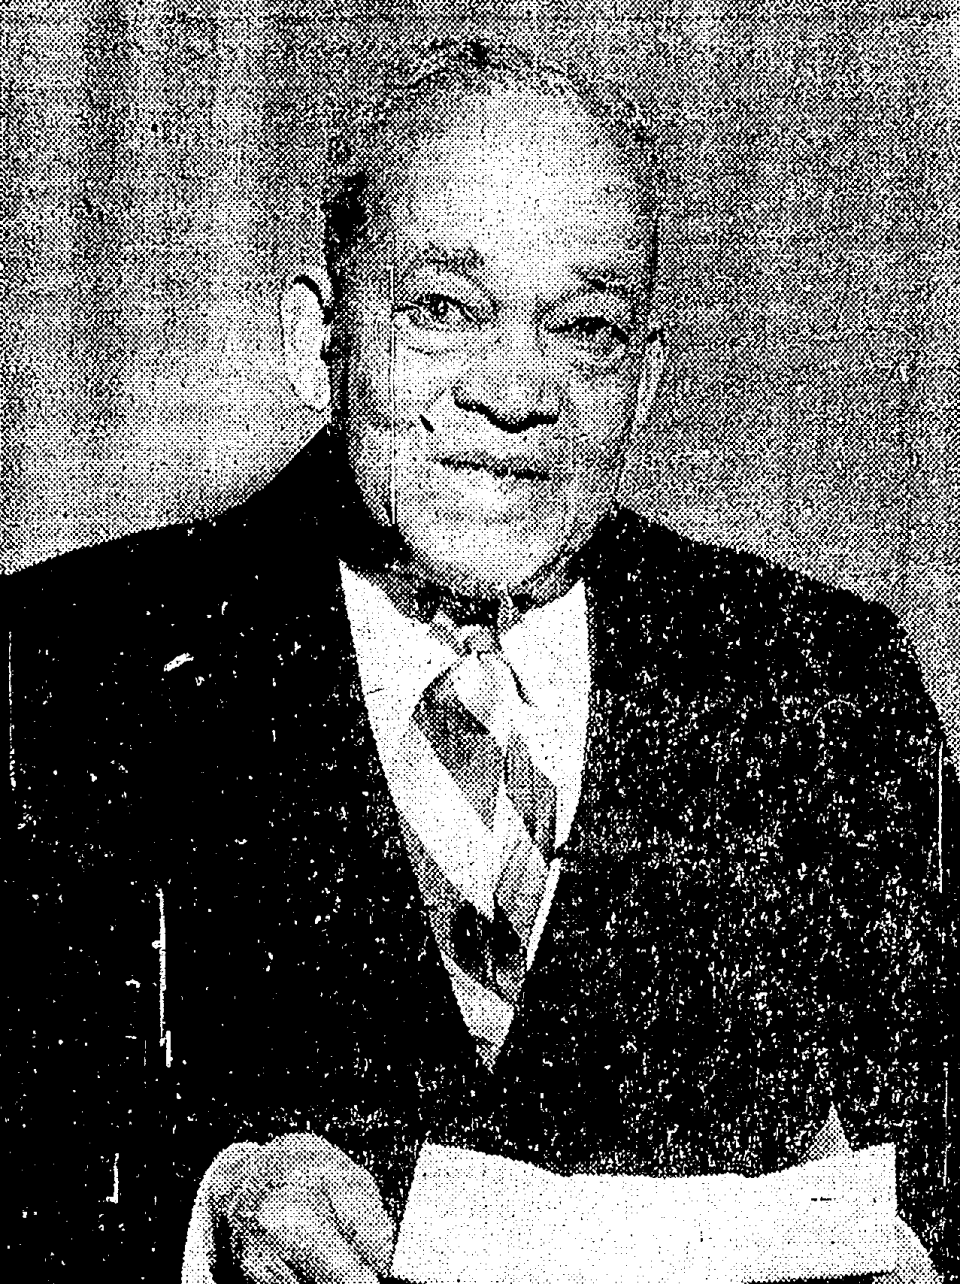 Photo of Bucky Lew from the Springfield Union.